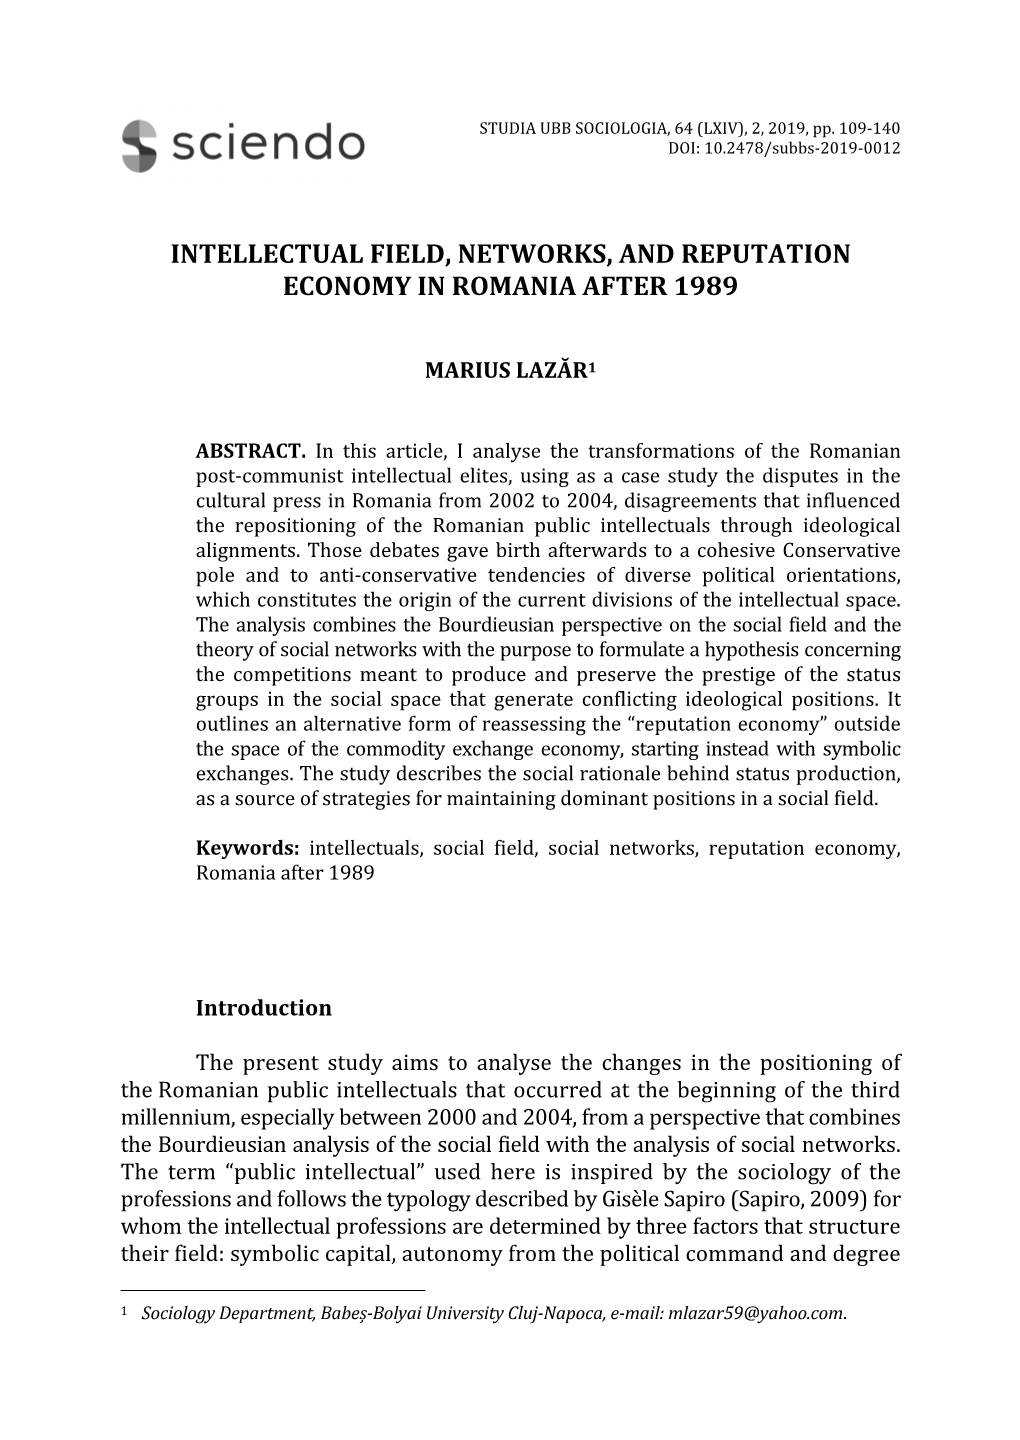 Intellectual Field, Networks, and Reputation Economy in Romania After 1989